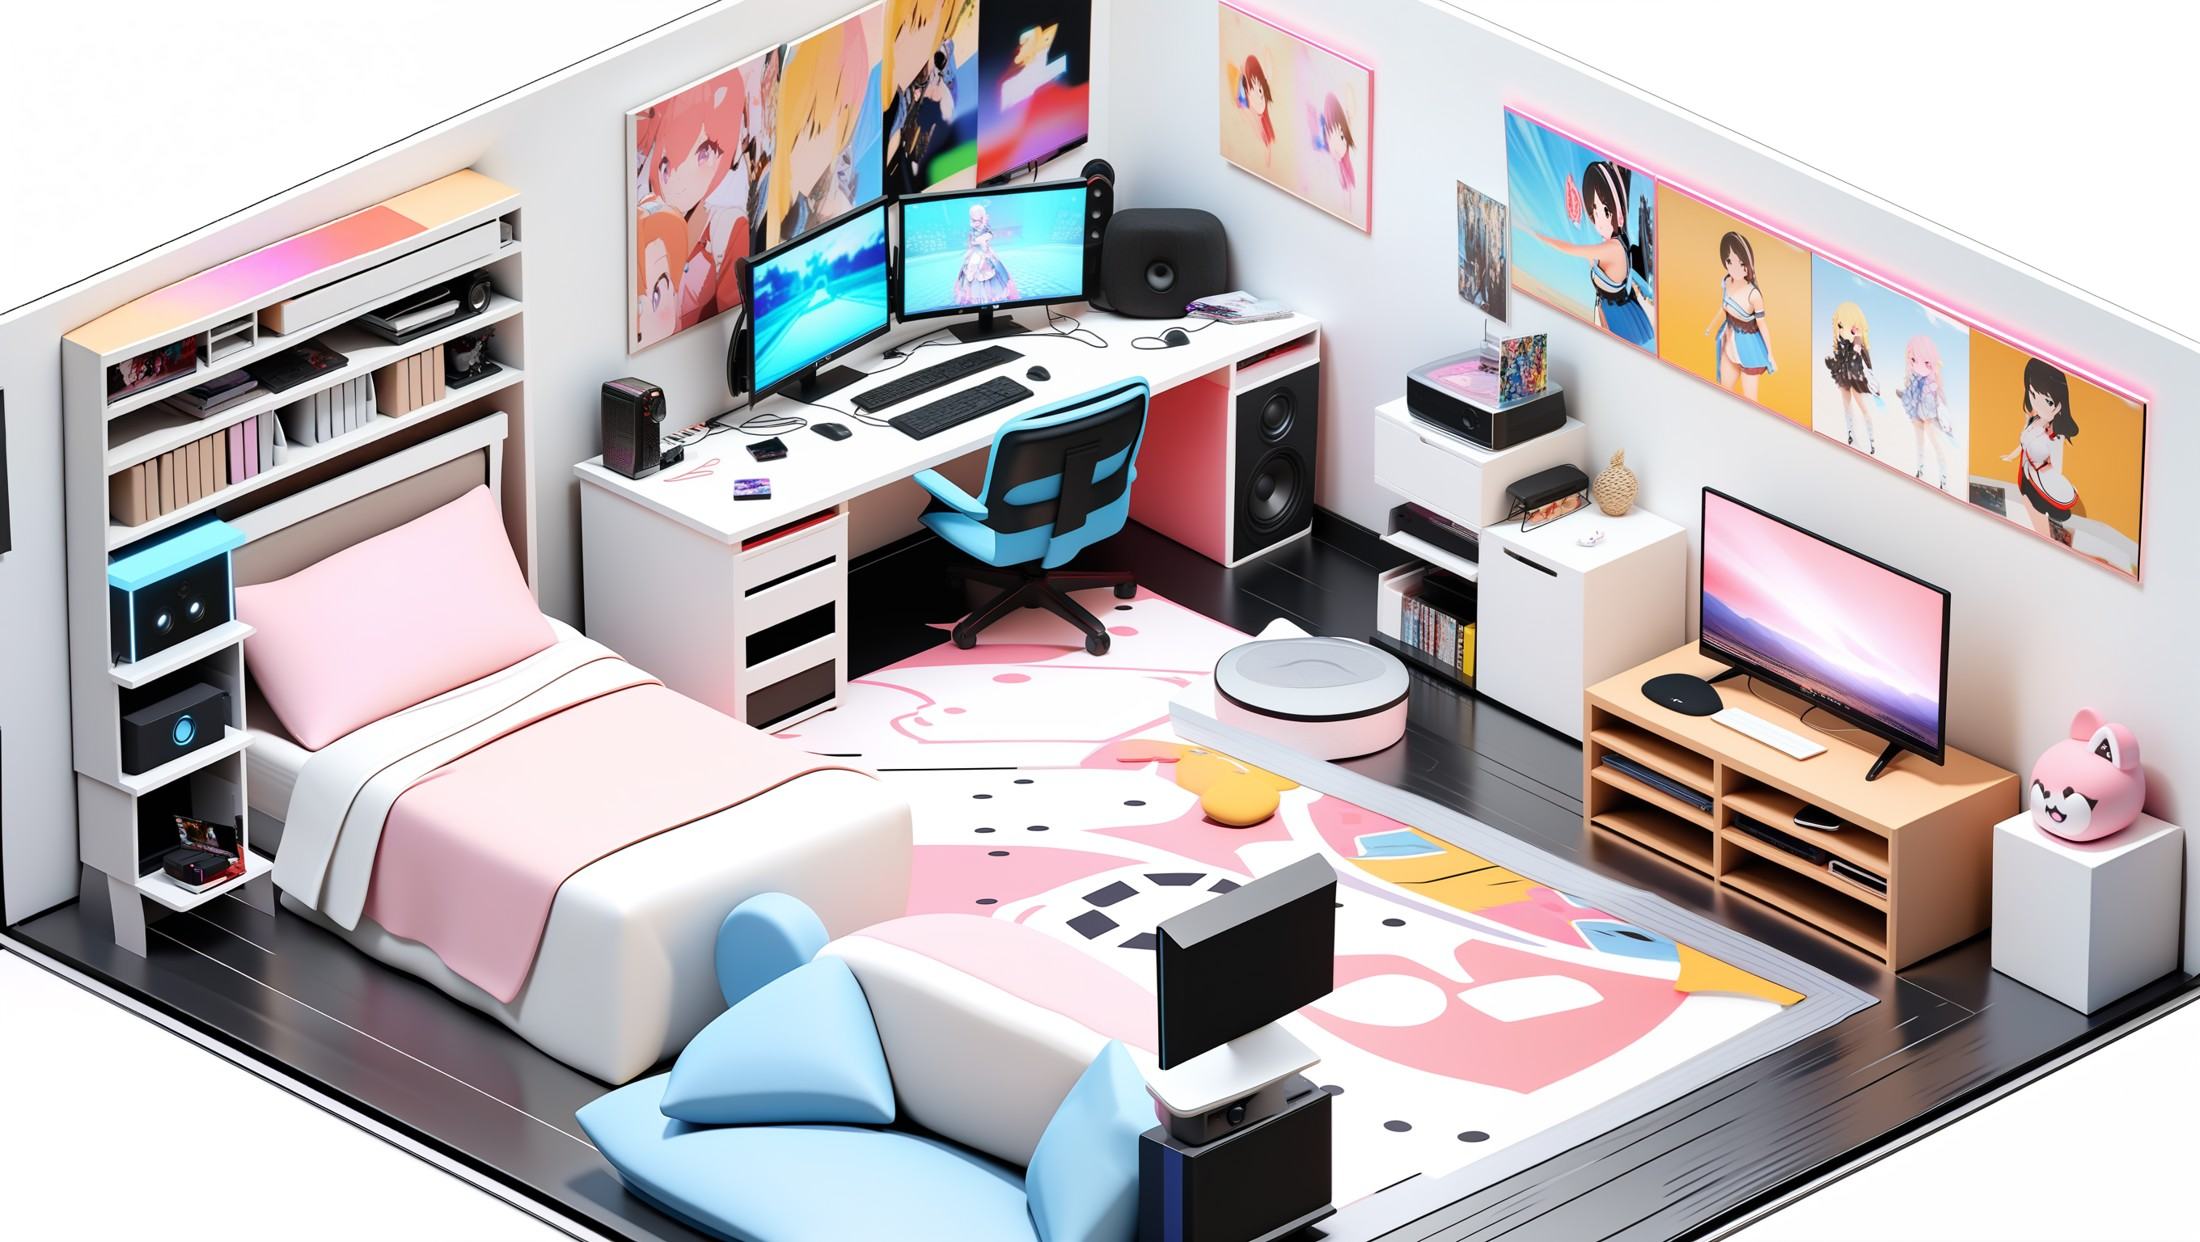 masterpiece, best quality, <lora:gamebg:0.5>,3d,white background,room-style,posters, bishoujo figurines, glass display cabinet, manga shelves, gaming console, plush toys, anime DVDs, computer desk, dual monitors, gaming chair, wall scrolls, LED strip lights, cosplay costumes, anime-themed bedding, bookshelf, collectible cards, model kits, framed art prints, decorative pillows, anime-themed rugs, headphones, drawing tablet, sound system, action figures